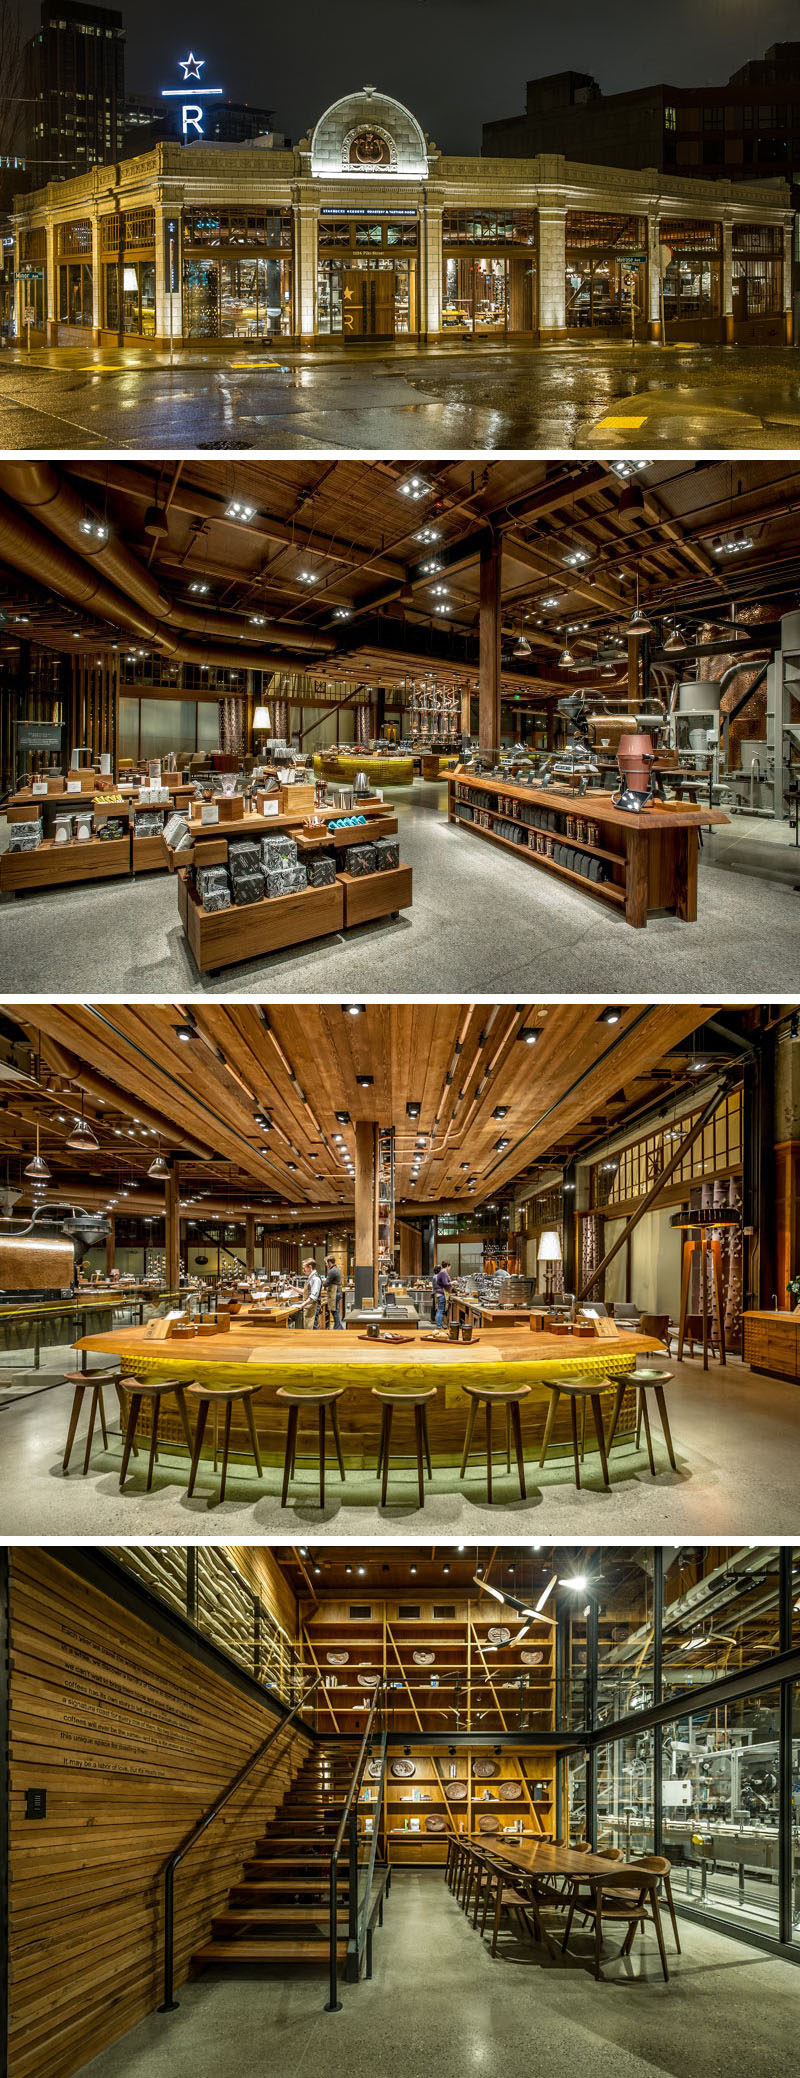 11 Starbucks Coffee Shops From Around The World // Starbucks' very own roasting and tasting facility, The Roastery, offers a unique experience unlike that of any other Starbucks location. Not only is the space huge and open, but guests at the Roastery are able to experience coffee in an immersive environment that allows them to engage with their coffee at every stage.